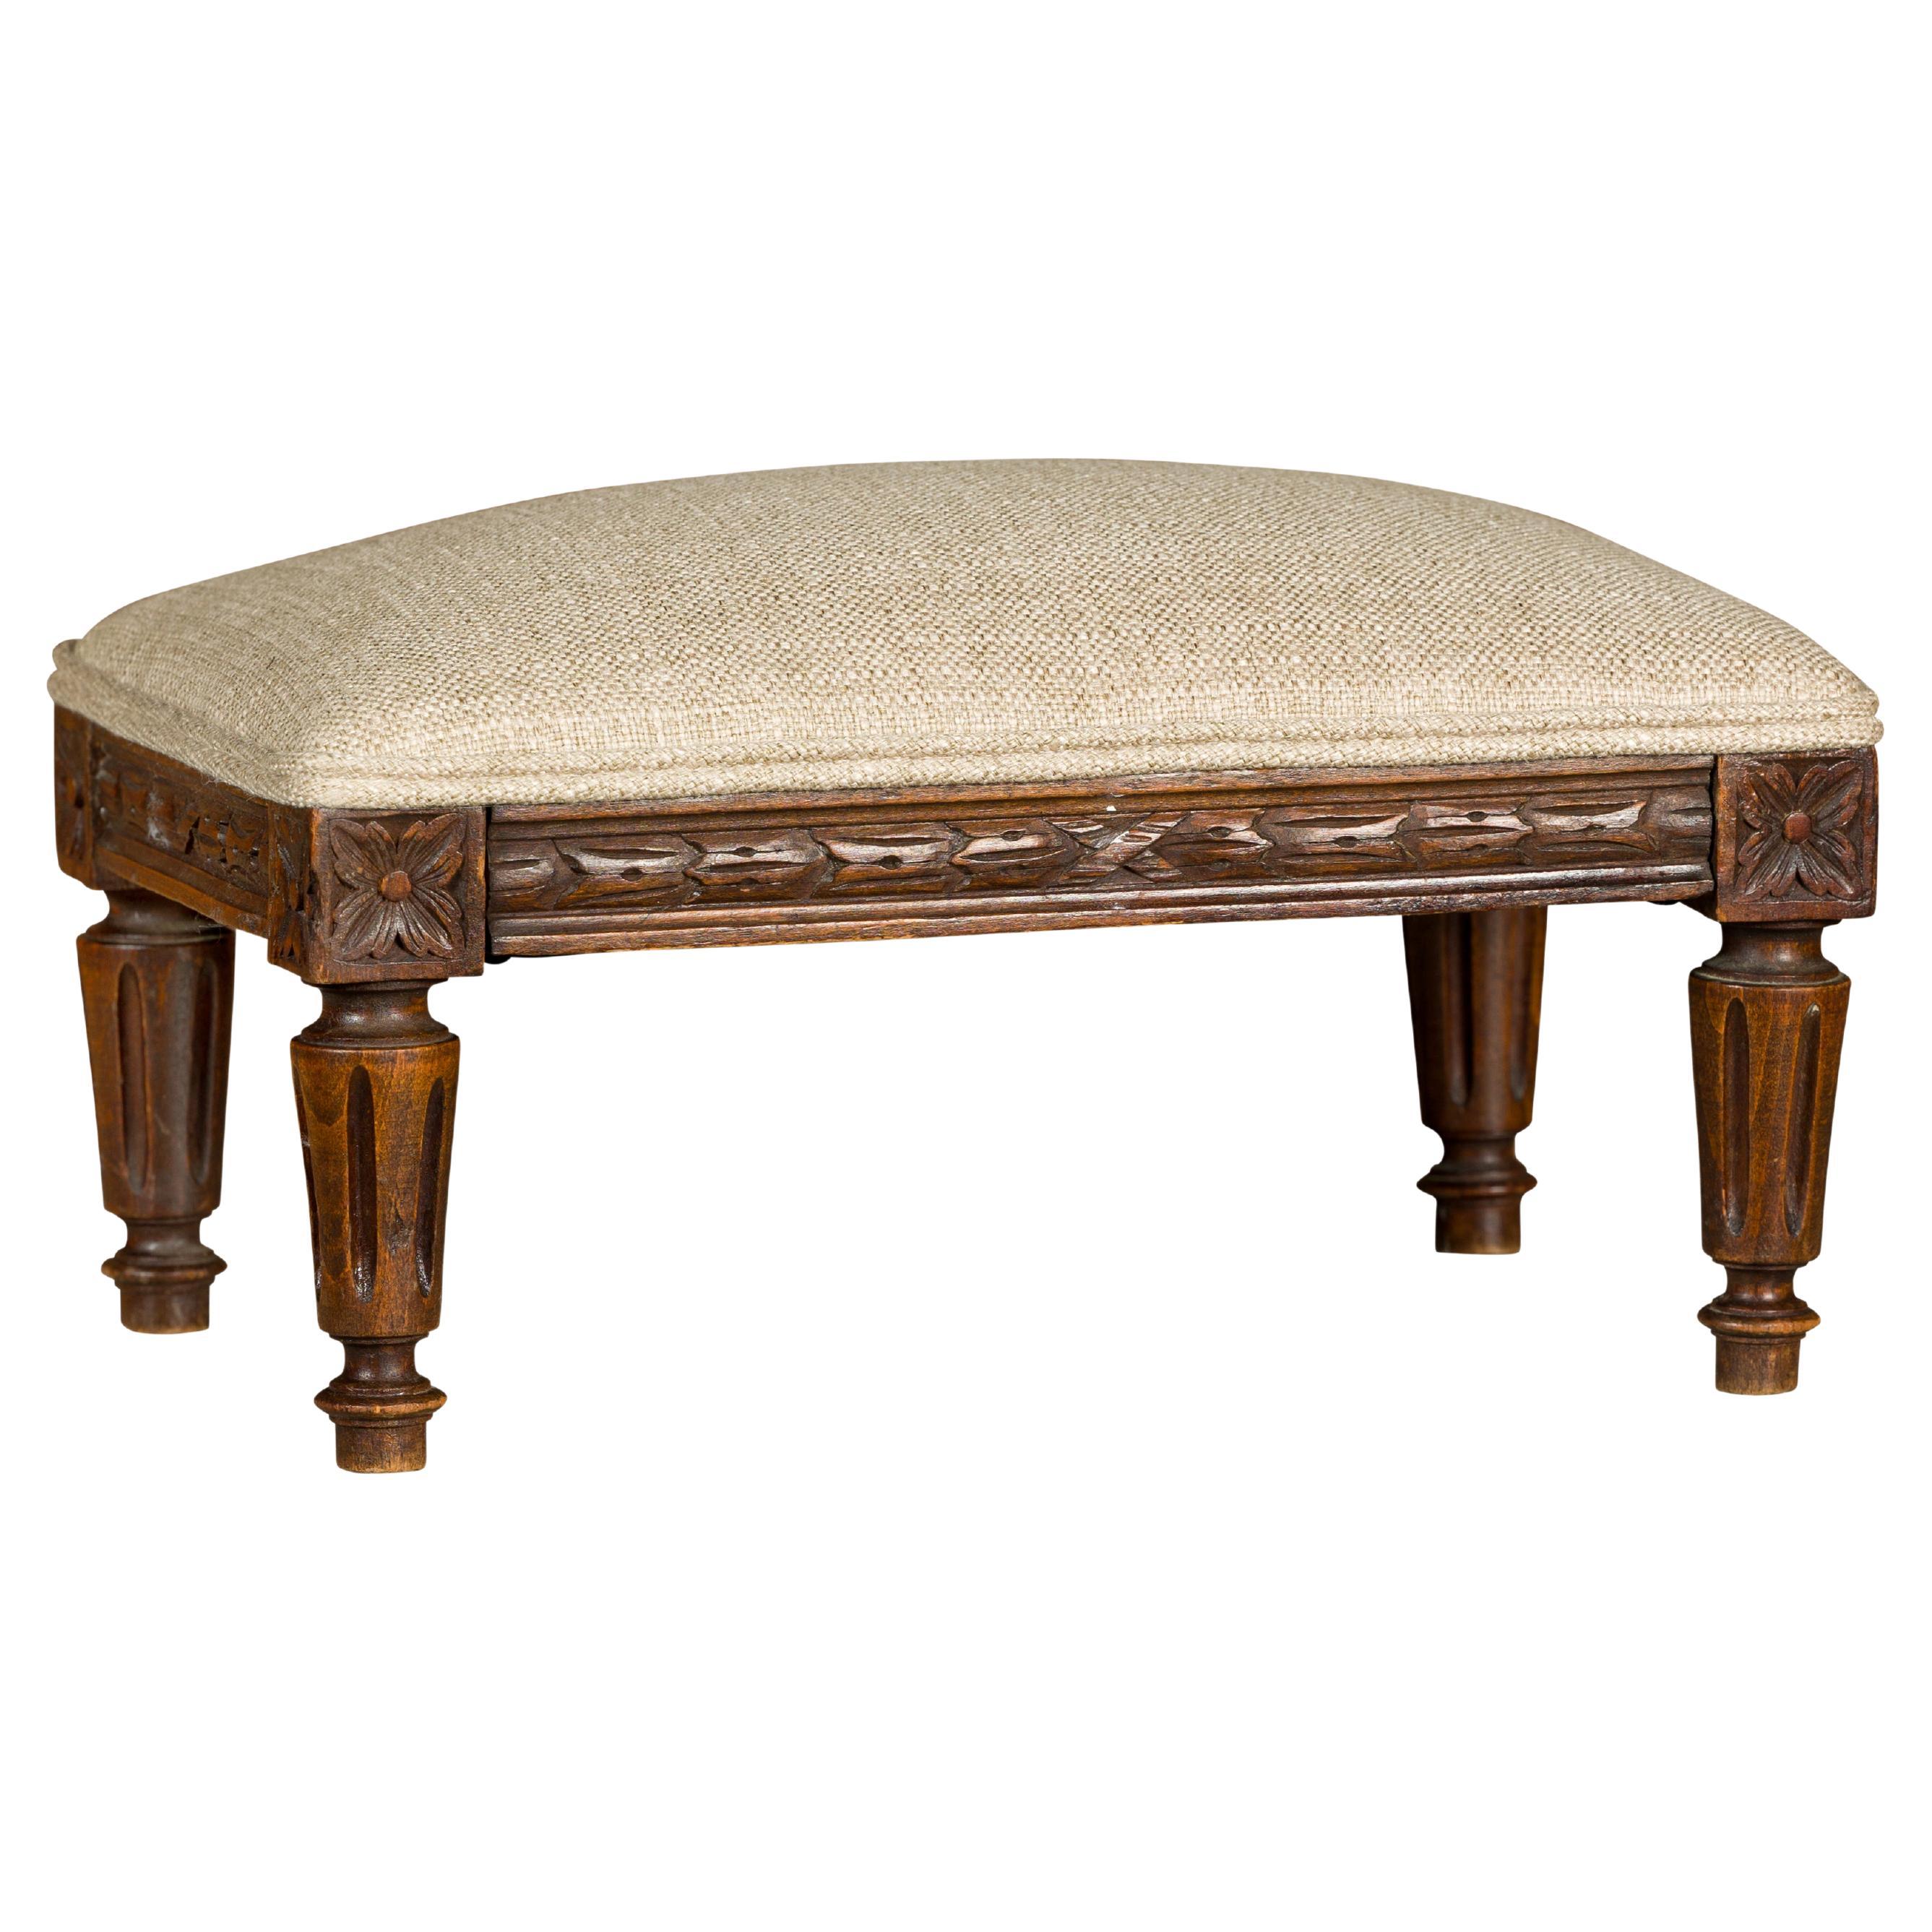 French Louis XVI Style 19th Century Footstool with Carved Décor and Fluted Legs